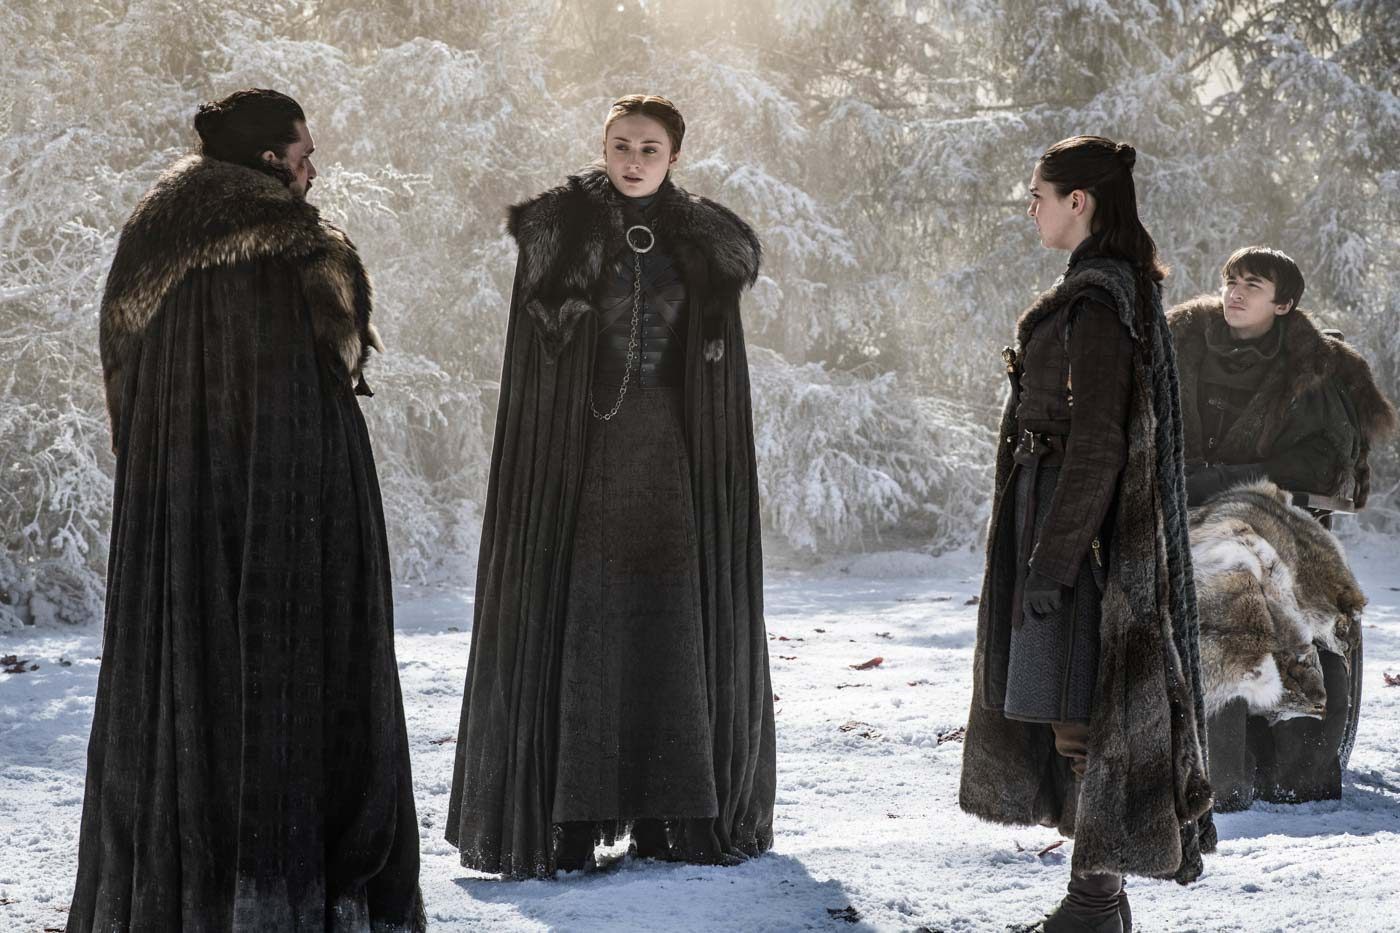 ‘Now our watch is ended’: history-making ‘Game of Thrones’ wraps